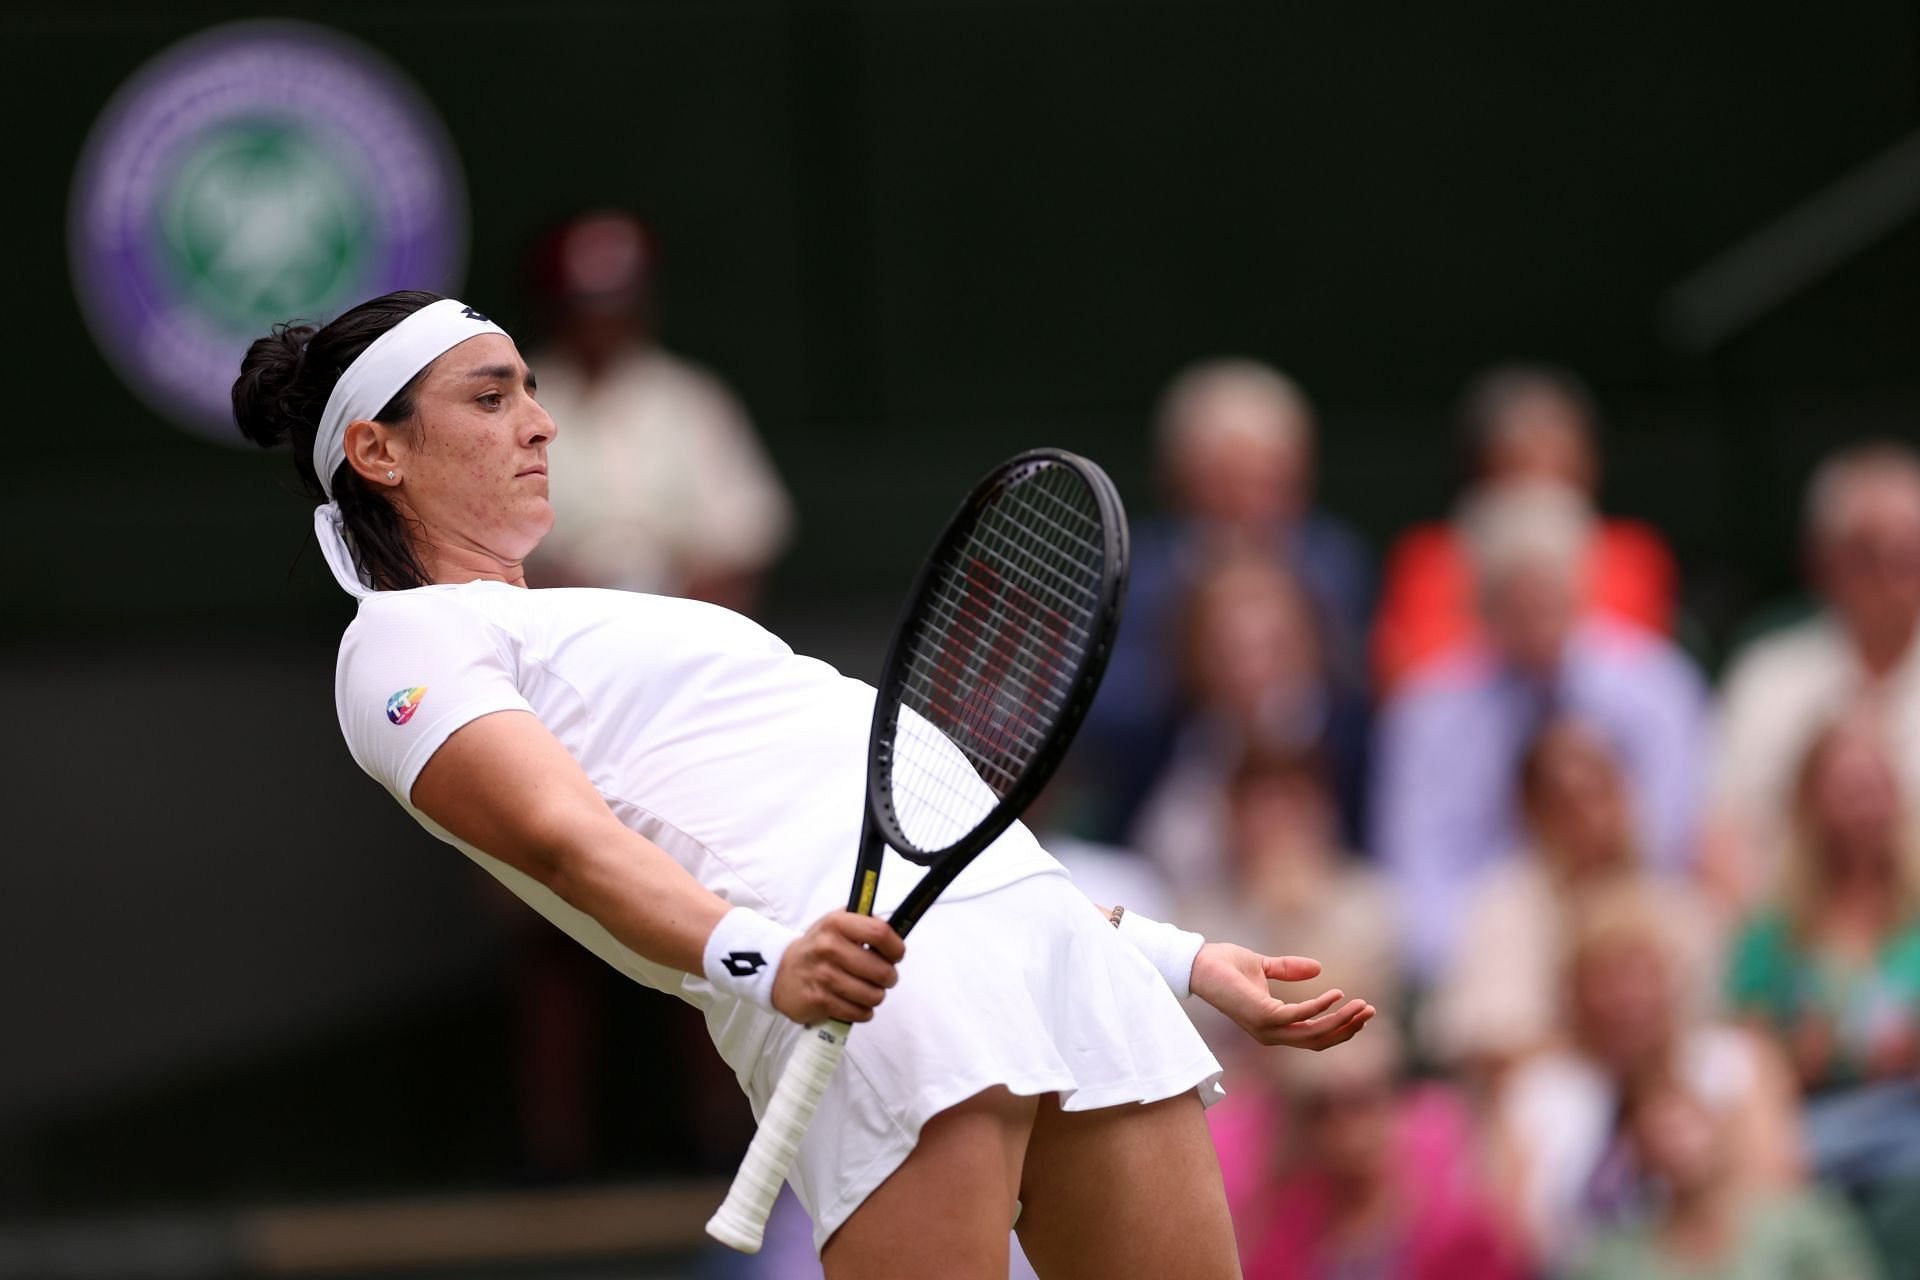 Ons Jabeur takes on Elise Mertens in the fourth round at Wimbledon